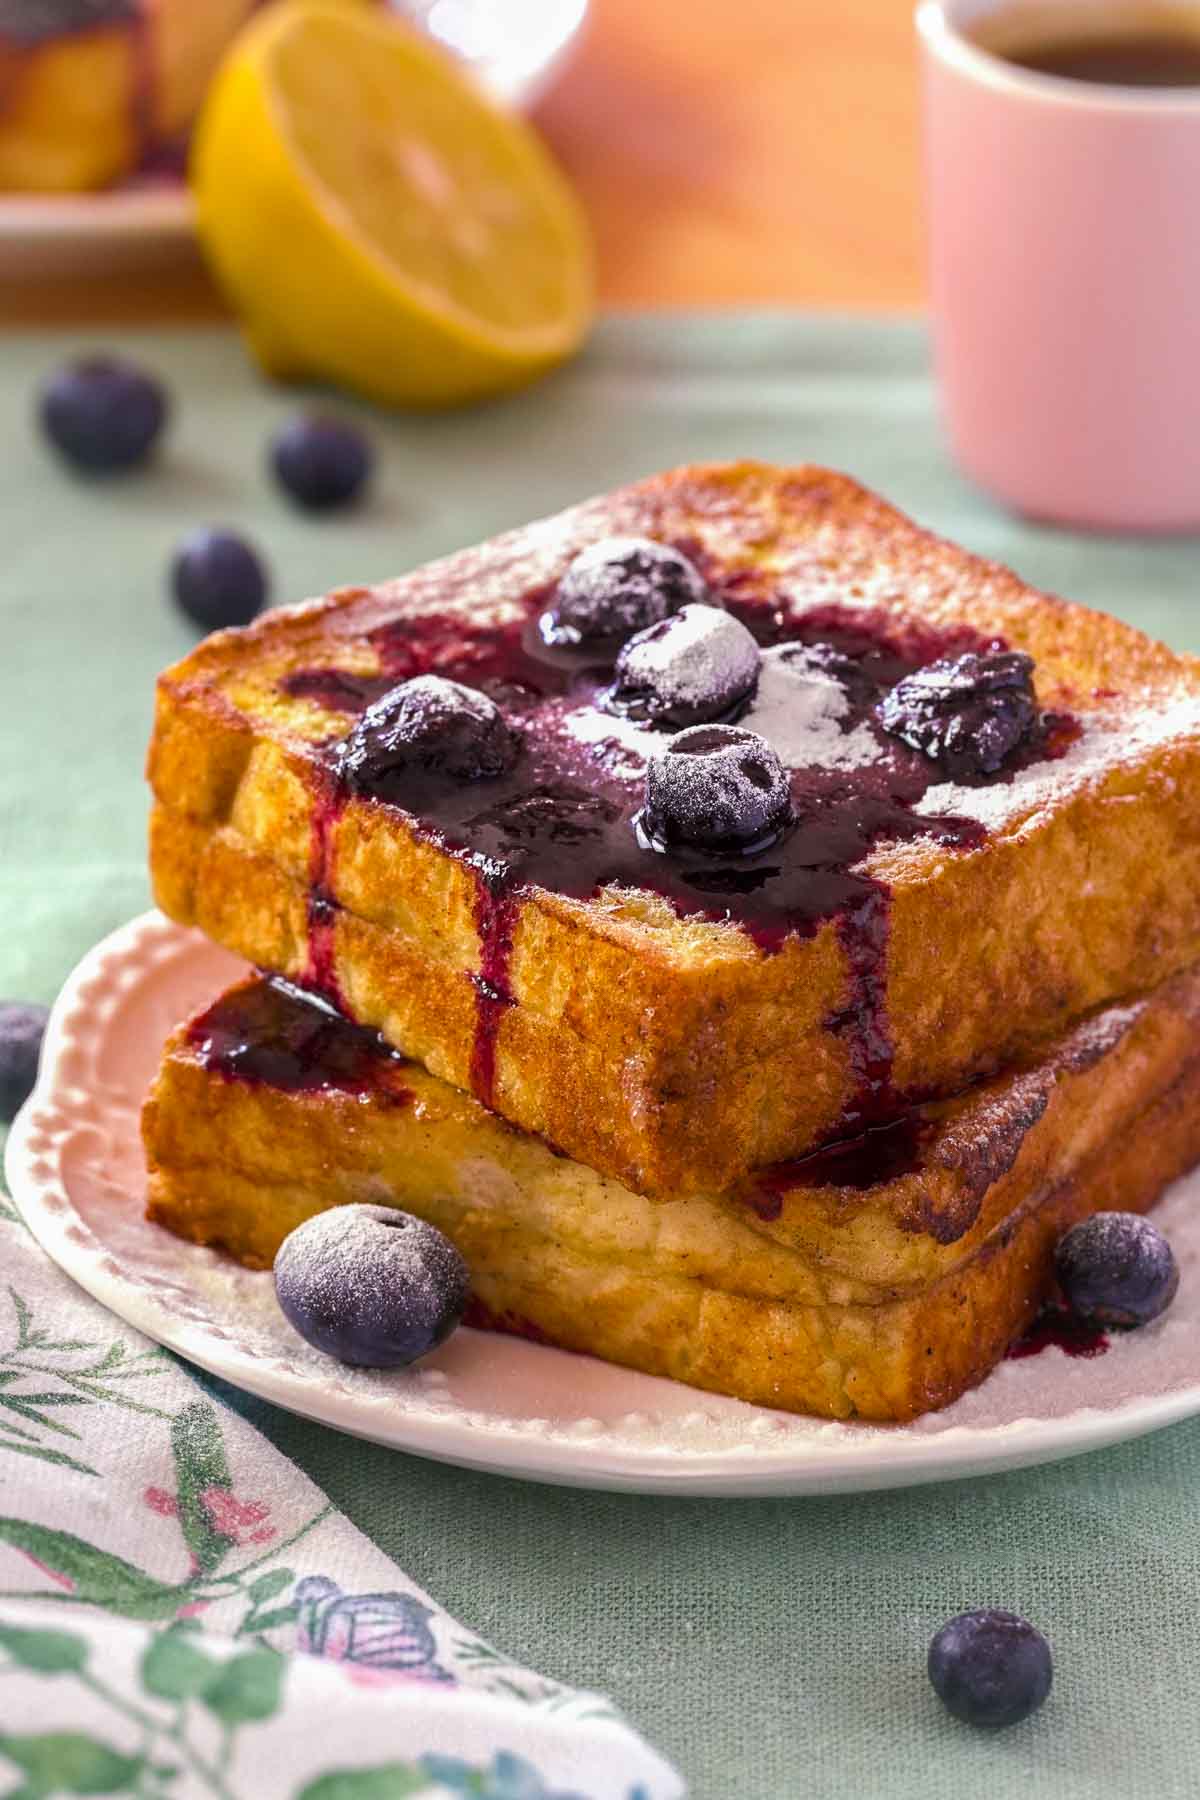 Lemon Blueberry French Toast on a white plate. The stuffed French toast is topped with blueberry compote, fresh blueberries, and icing sugar.